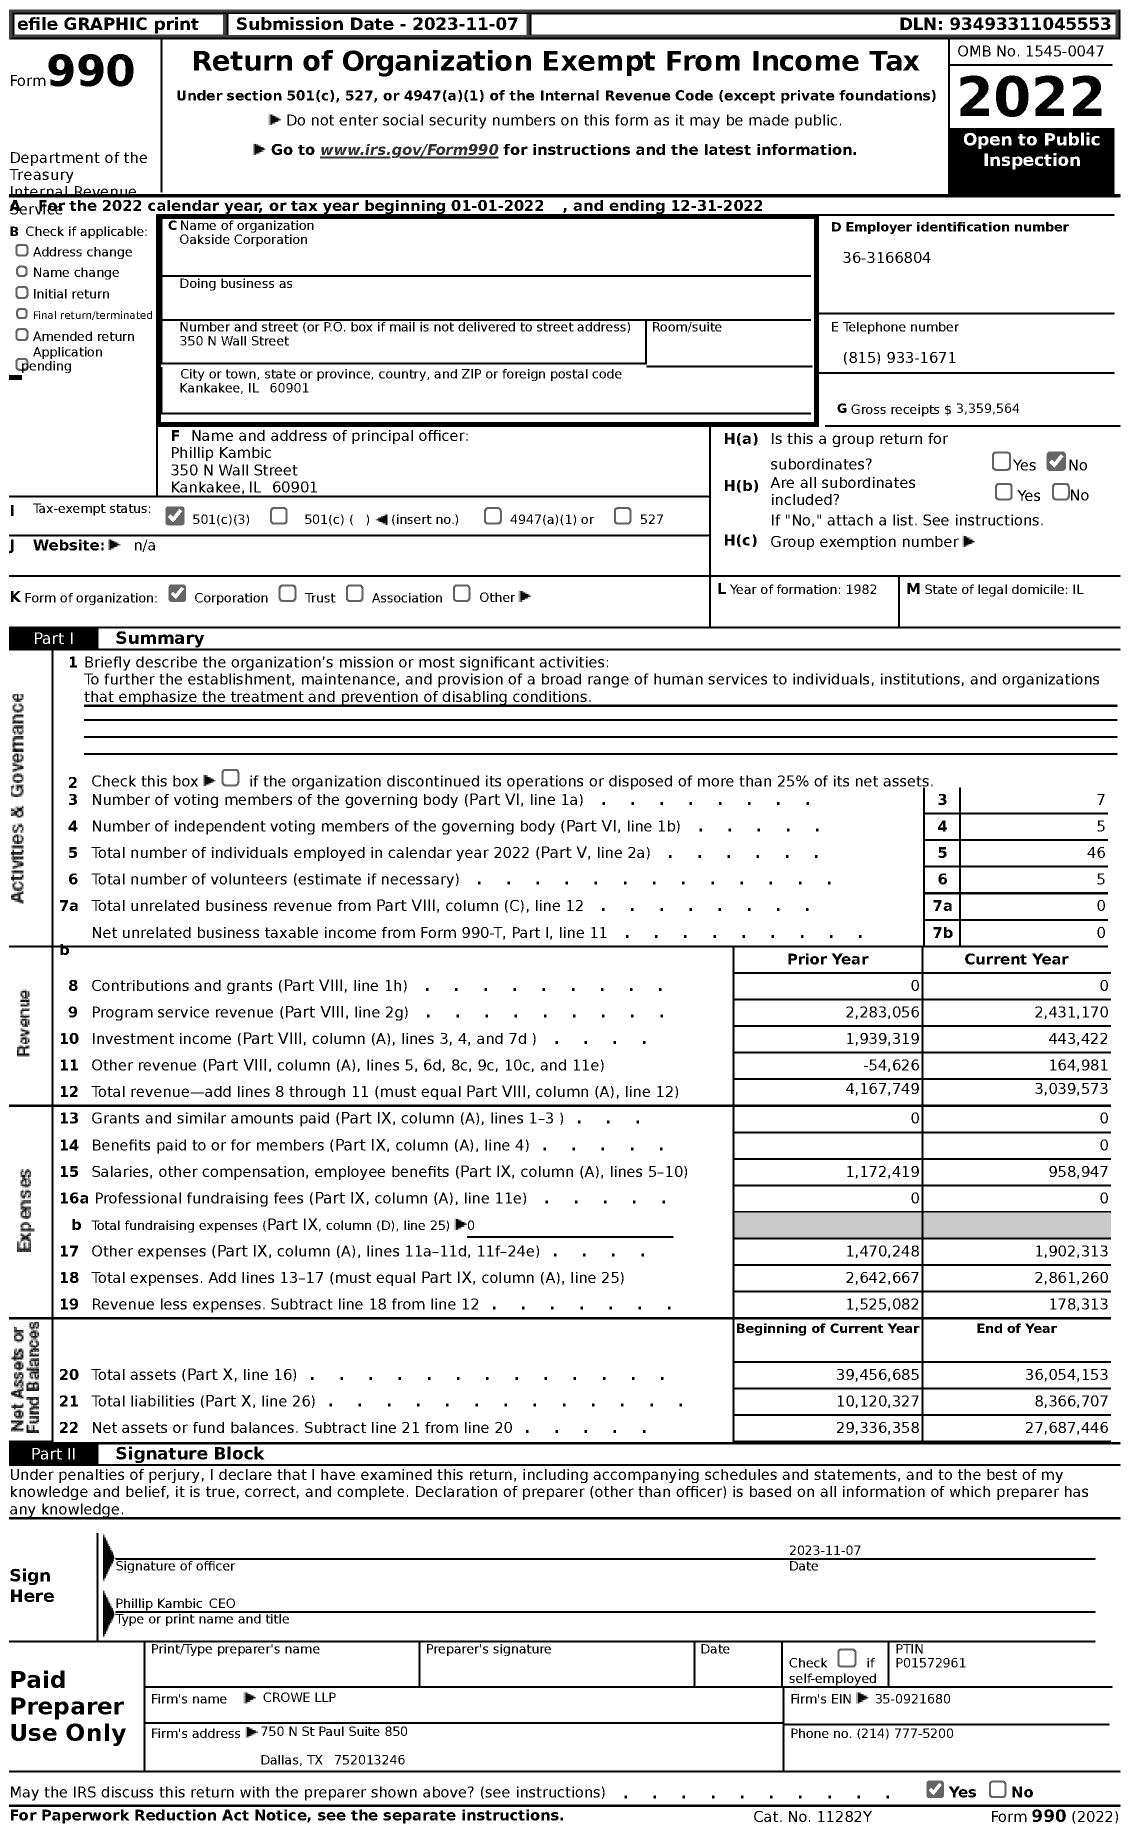 Image of first page of 2022 Form 990 for Oakside Corporation